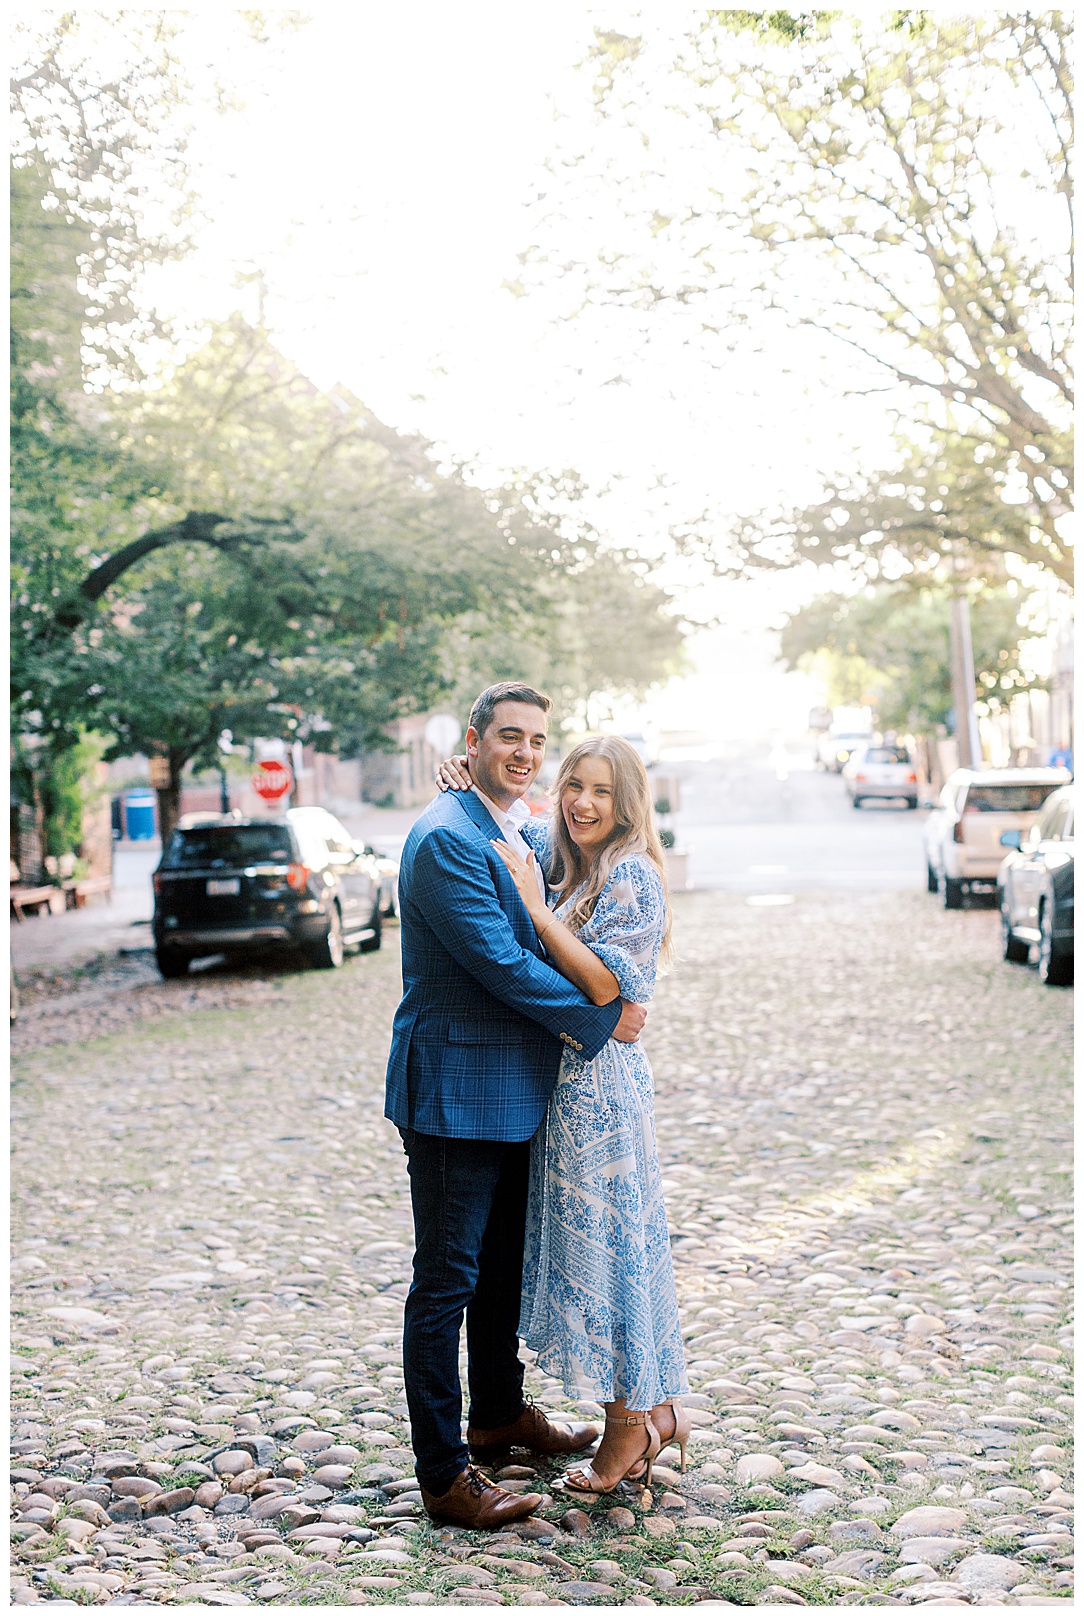 Old Town Alexandria Cobblestone Streets - Sunrise Engagement Session near DC